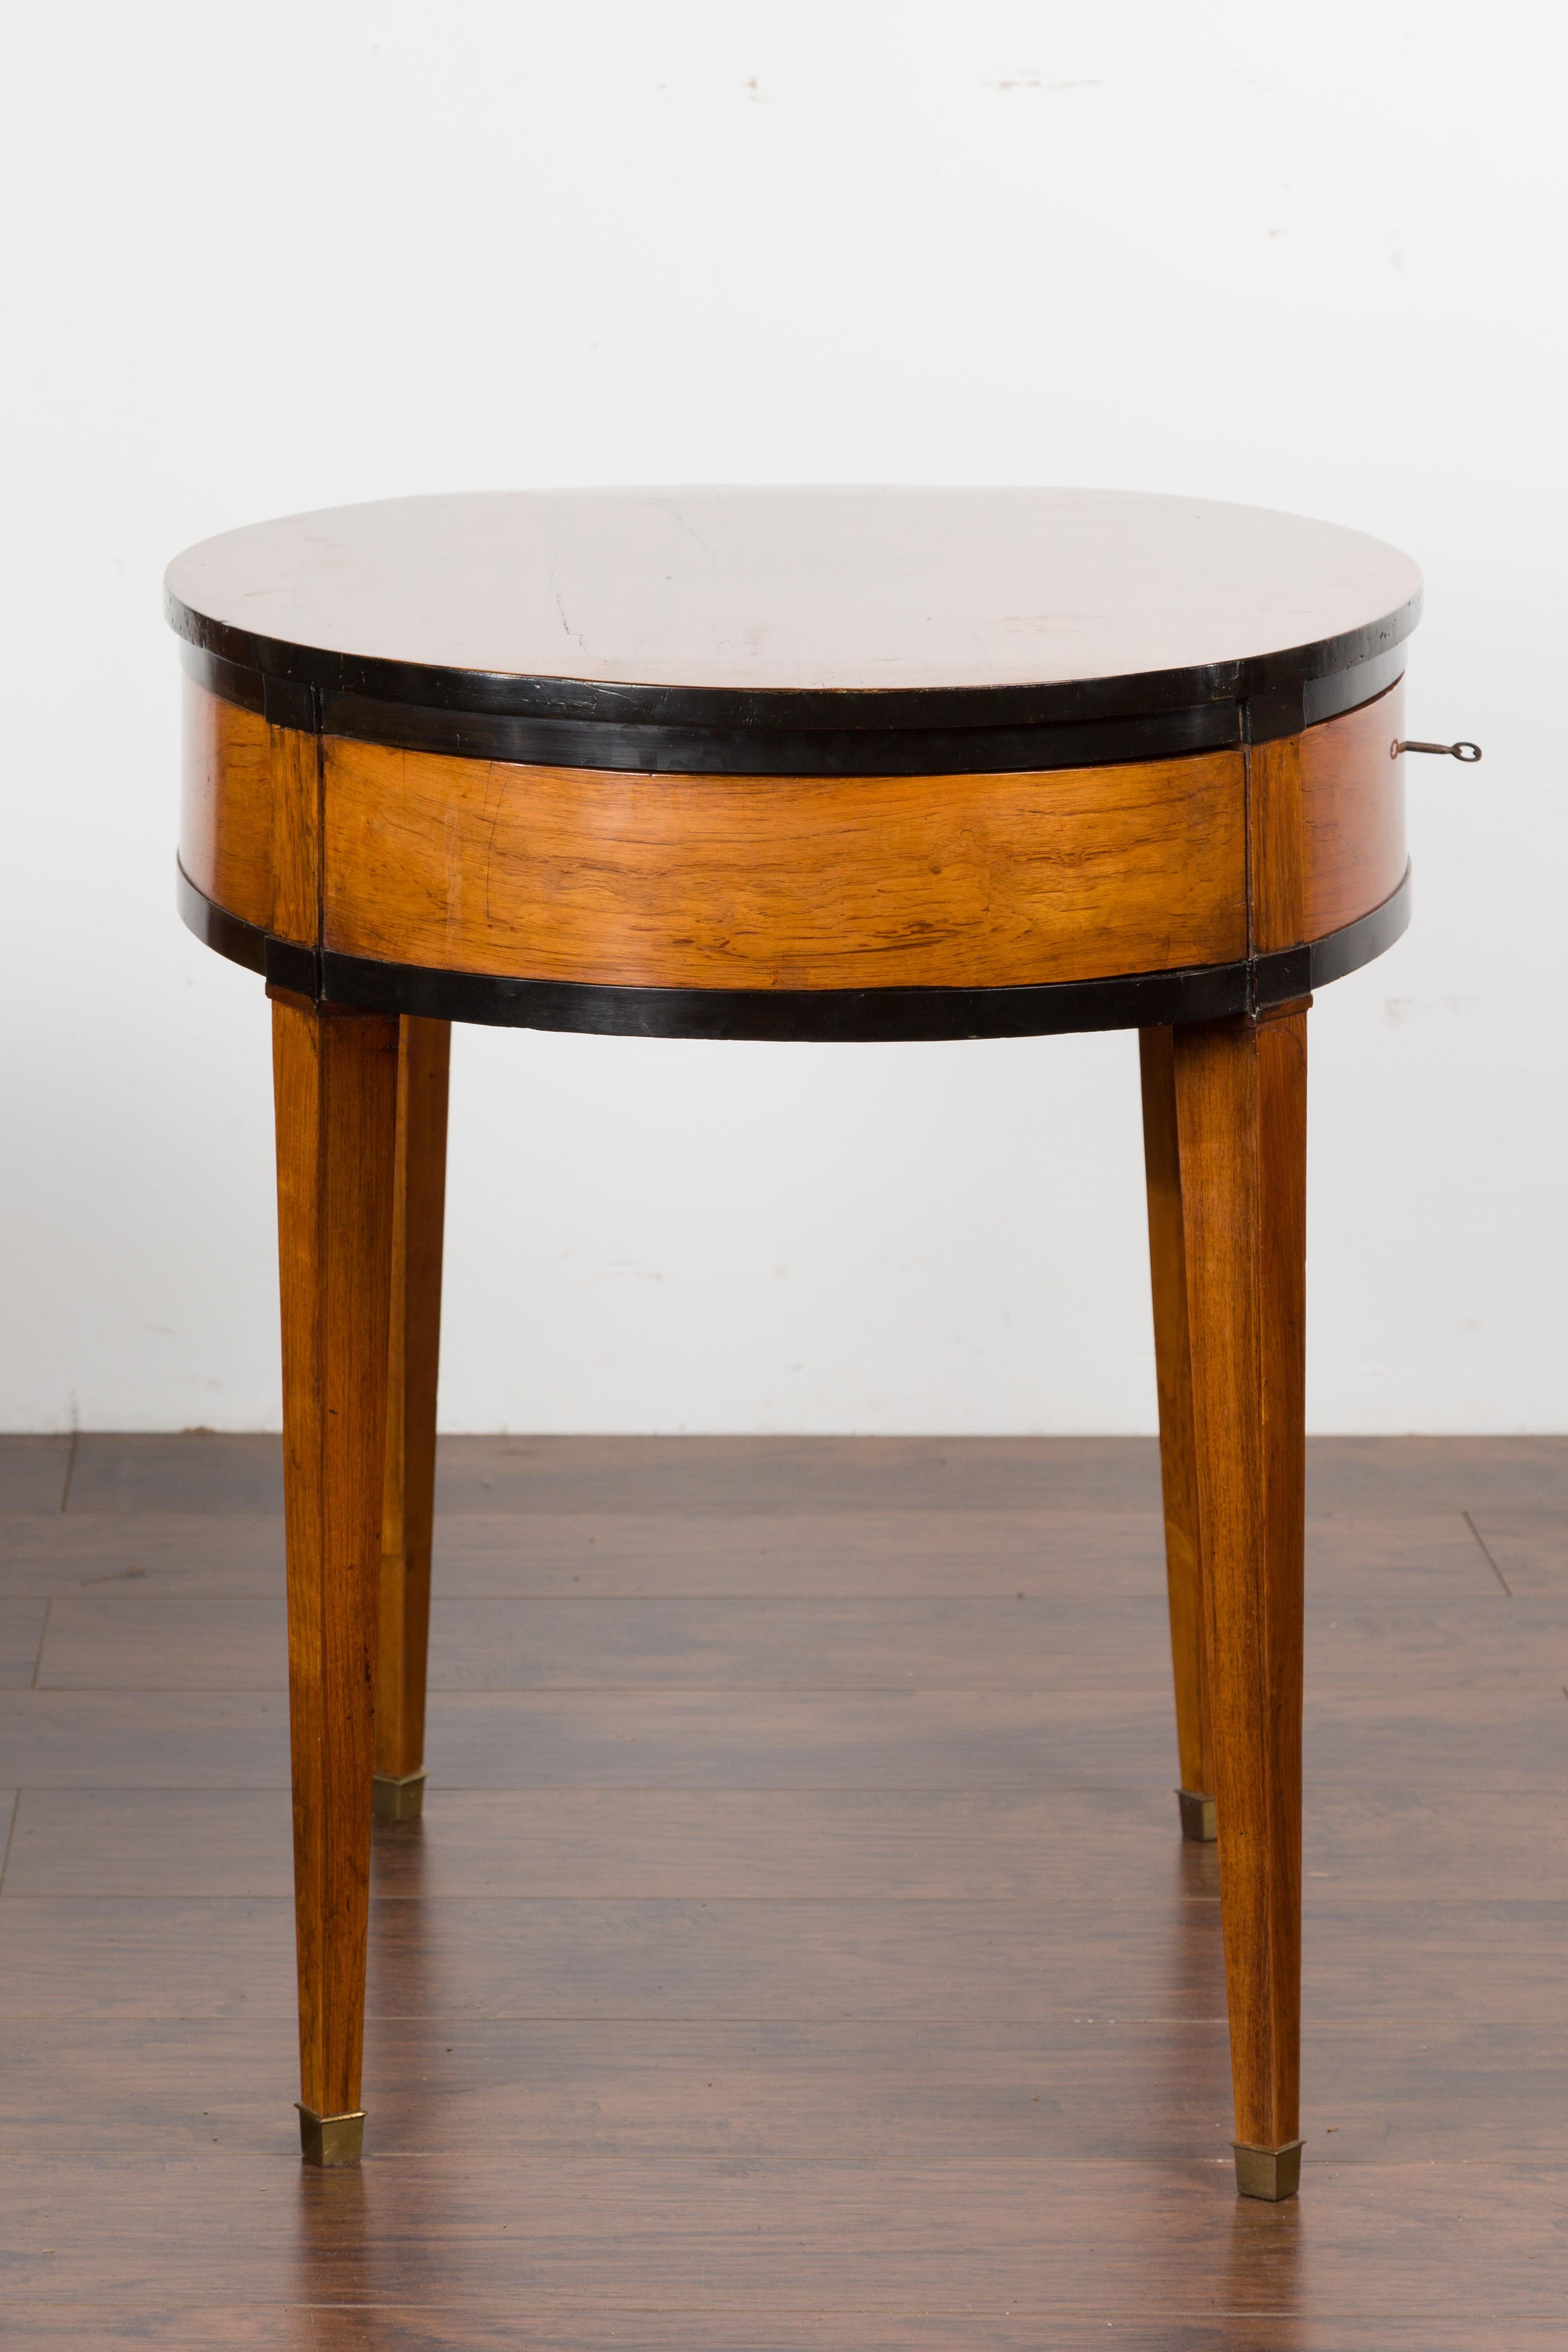 Austrian 1840s Biedermeier Oval Top Table with Drawer and Ebonized Accents 6